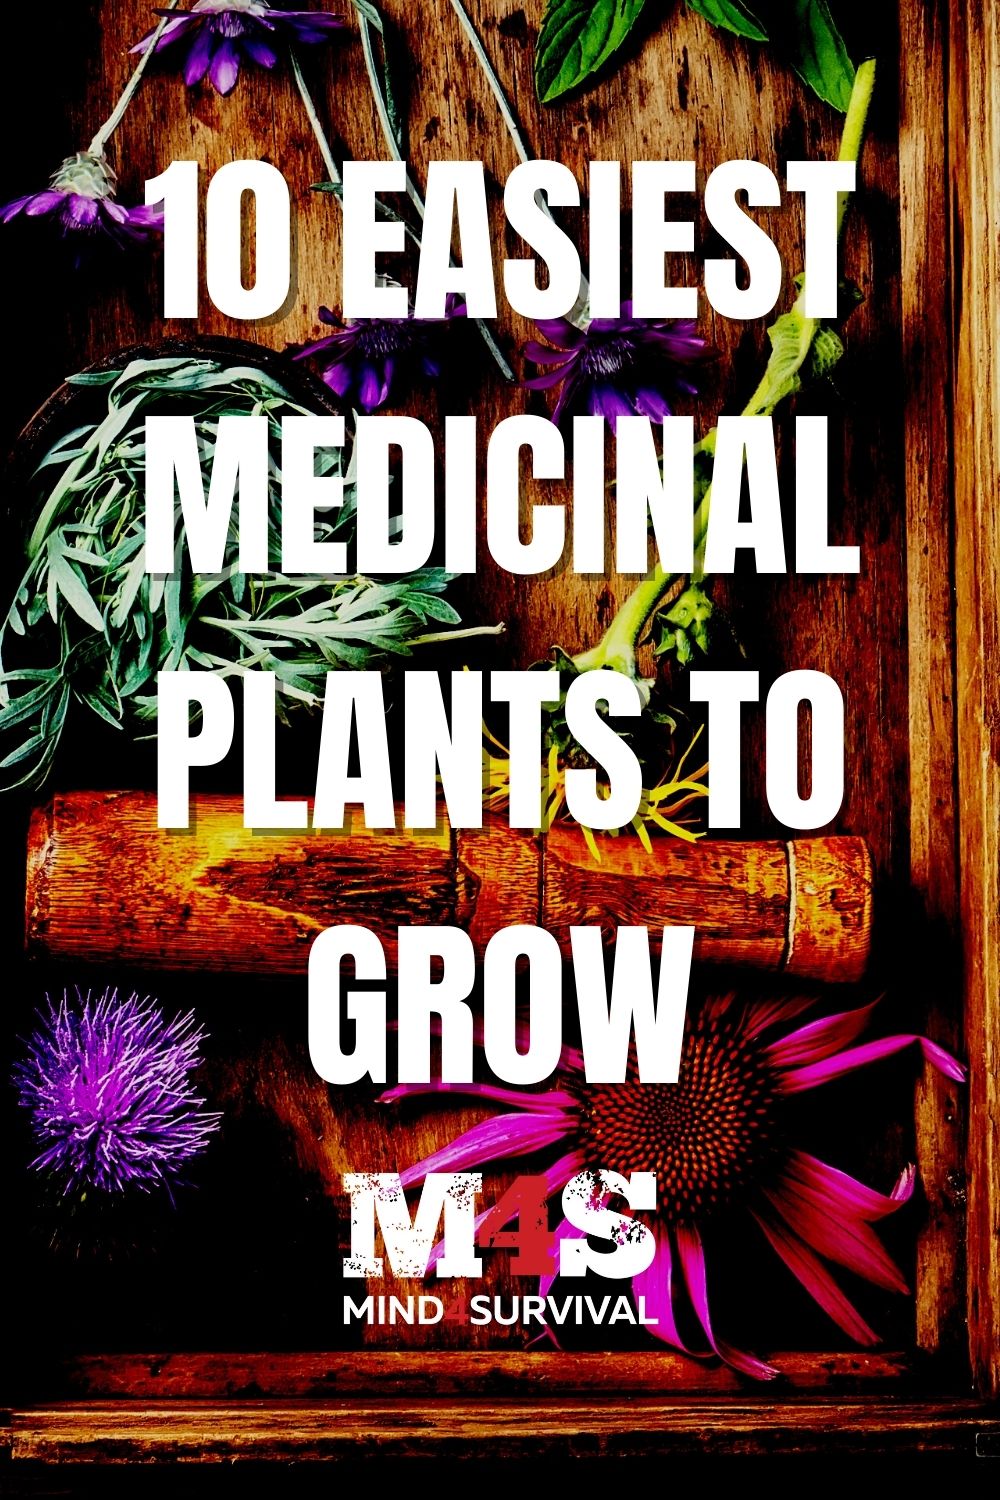 What Are the 10 Easiest Medicinal Plants to Grow?